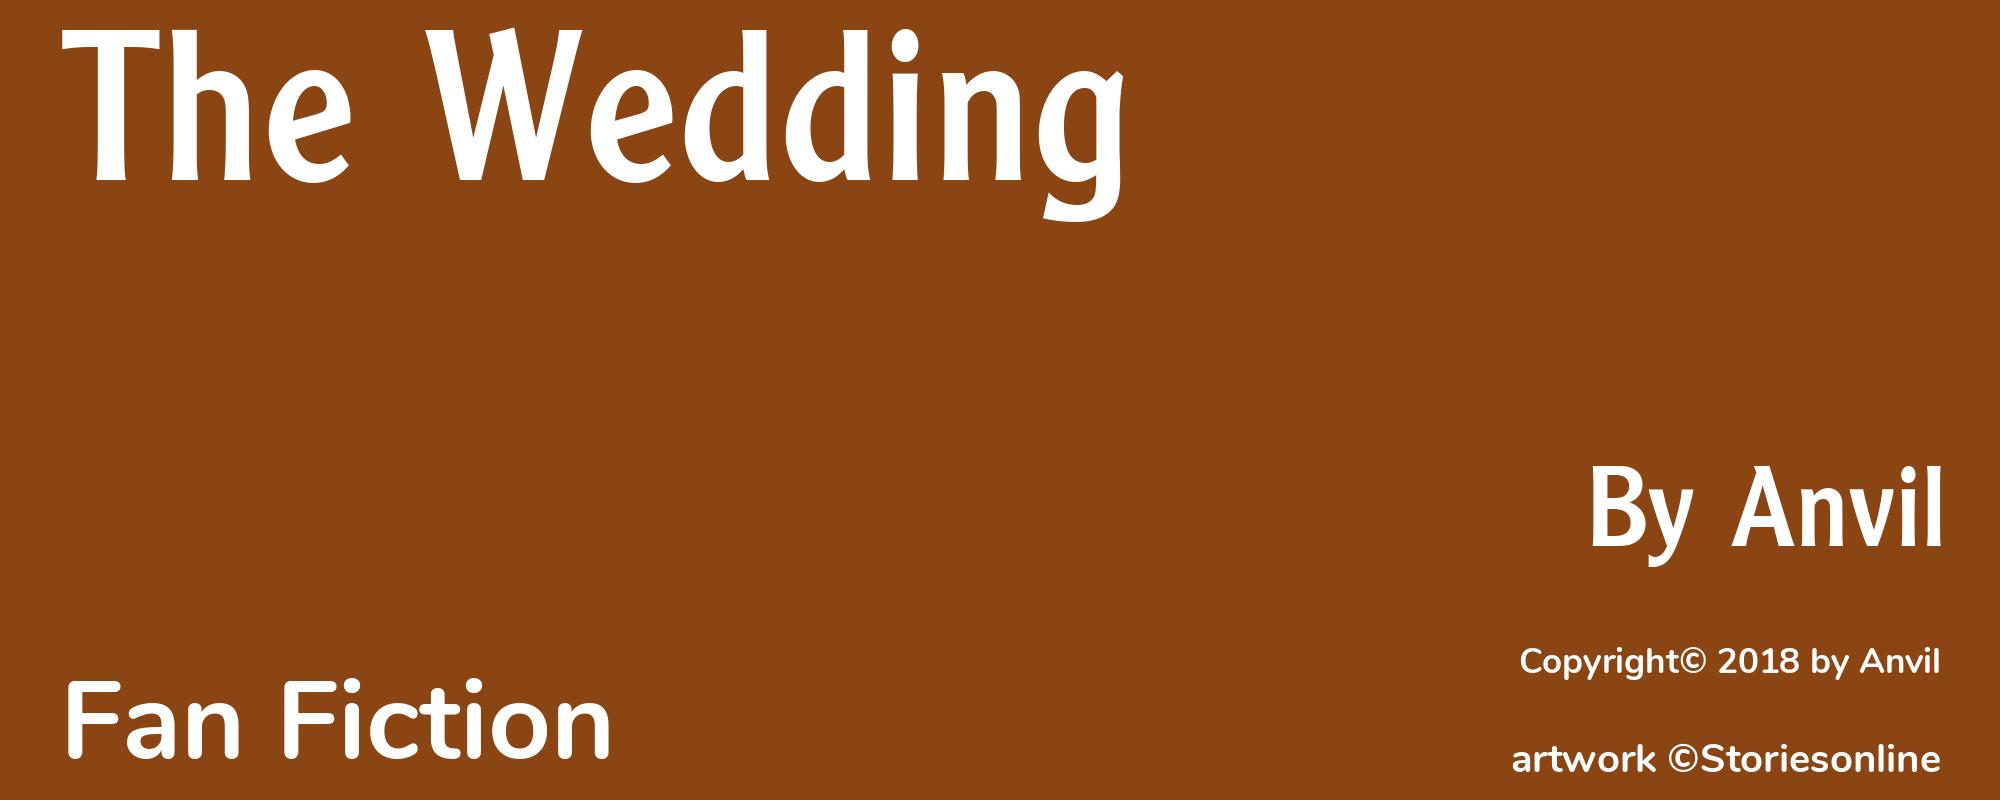 The Wedding - Cover